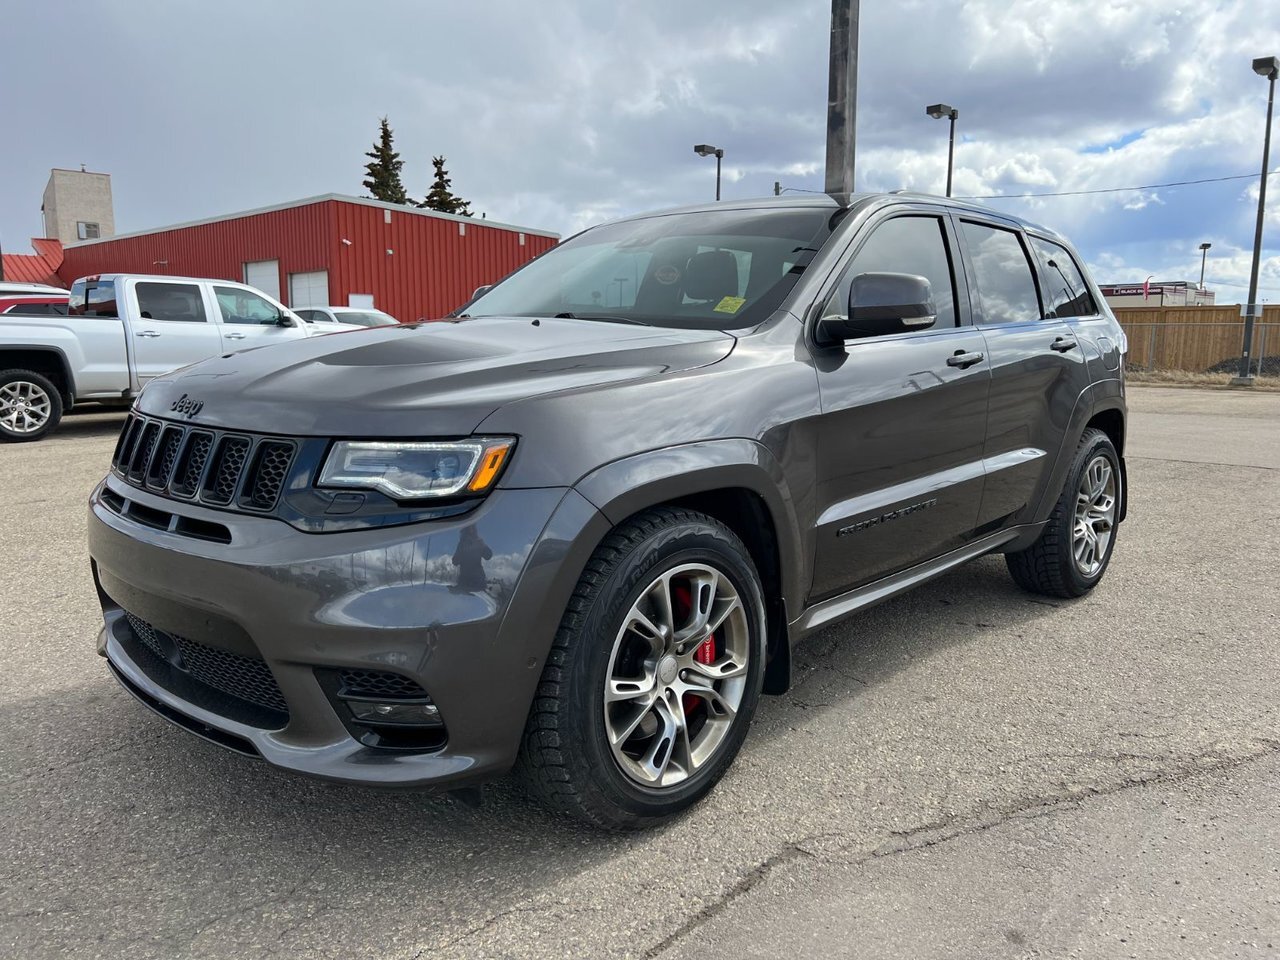 2019 Jeep Grand Cherokee SRT *ONE OWNER* Low KM's*6.4L V8*Leather*